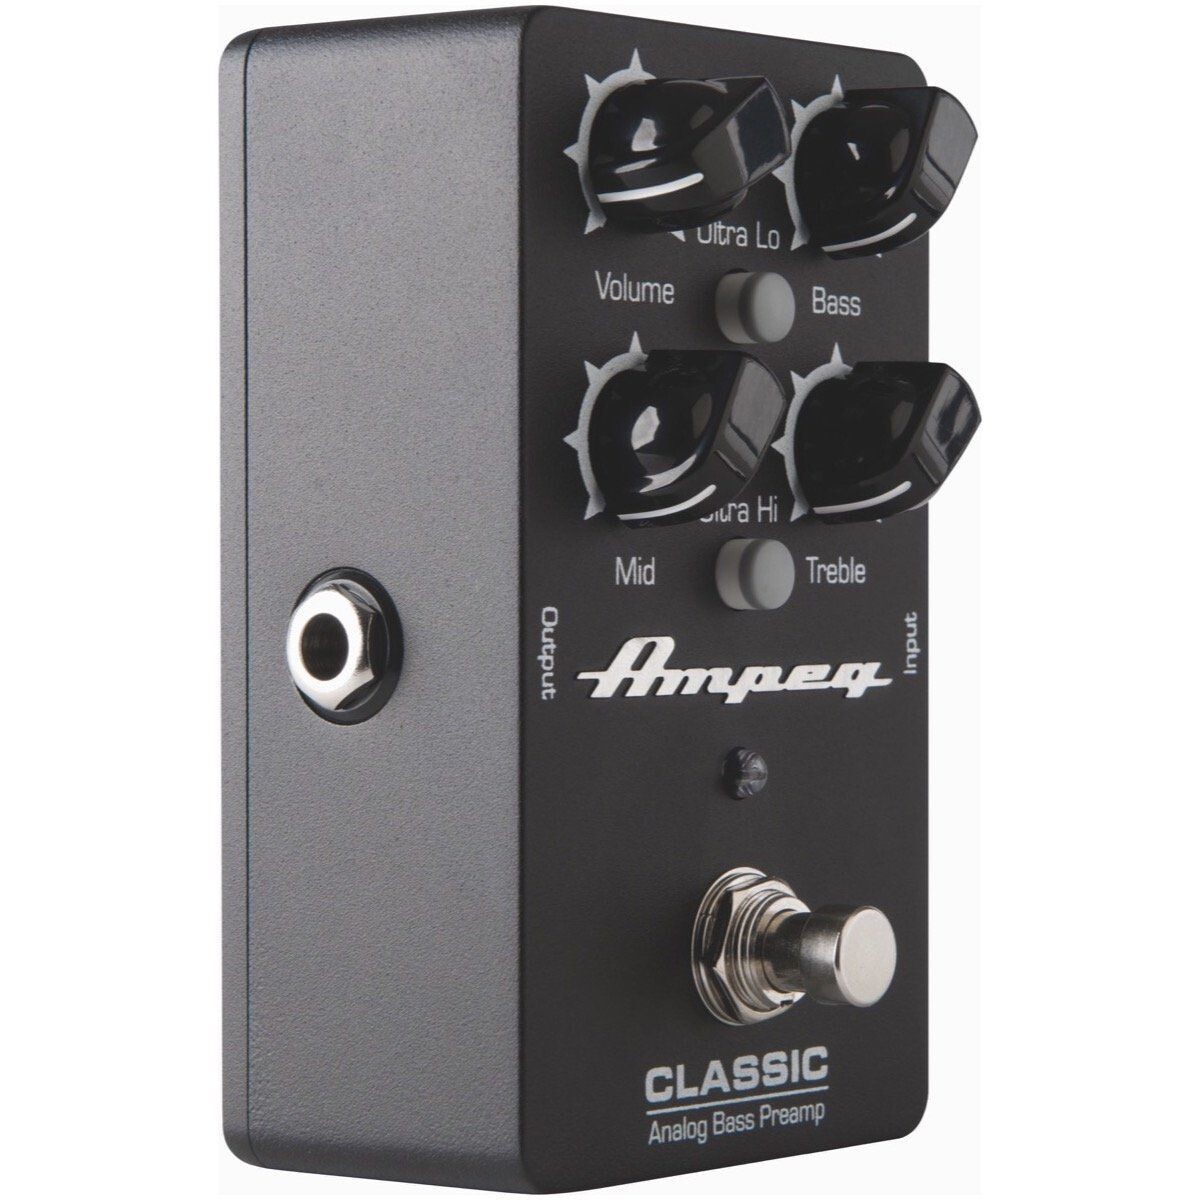 PEDAL EFECTOS/AMPEG CLASSIC ANALOG BASS PREAMP 